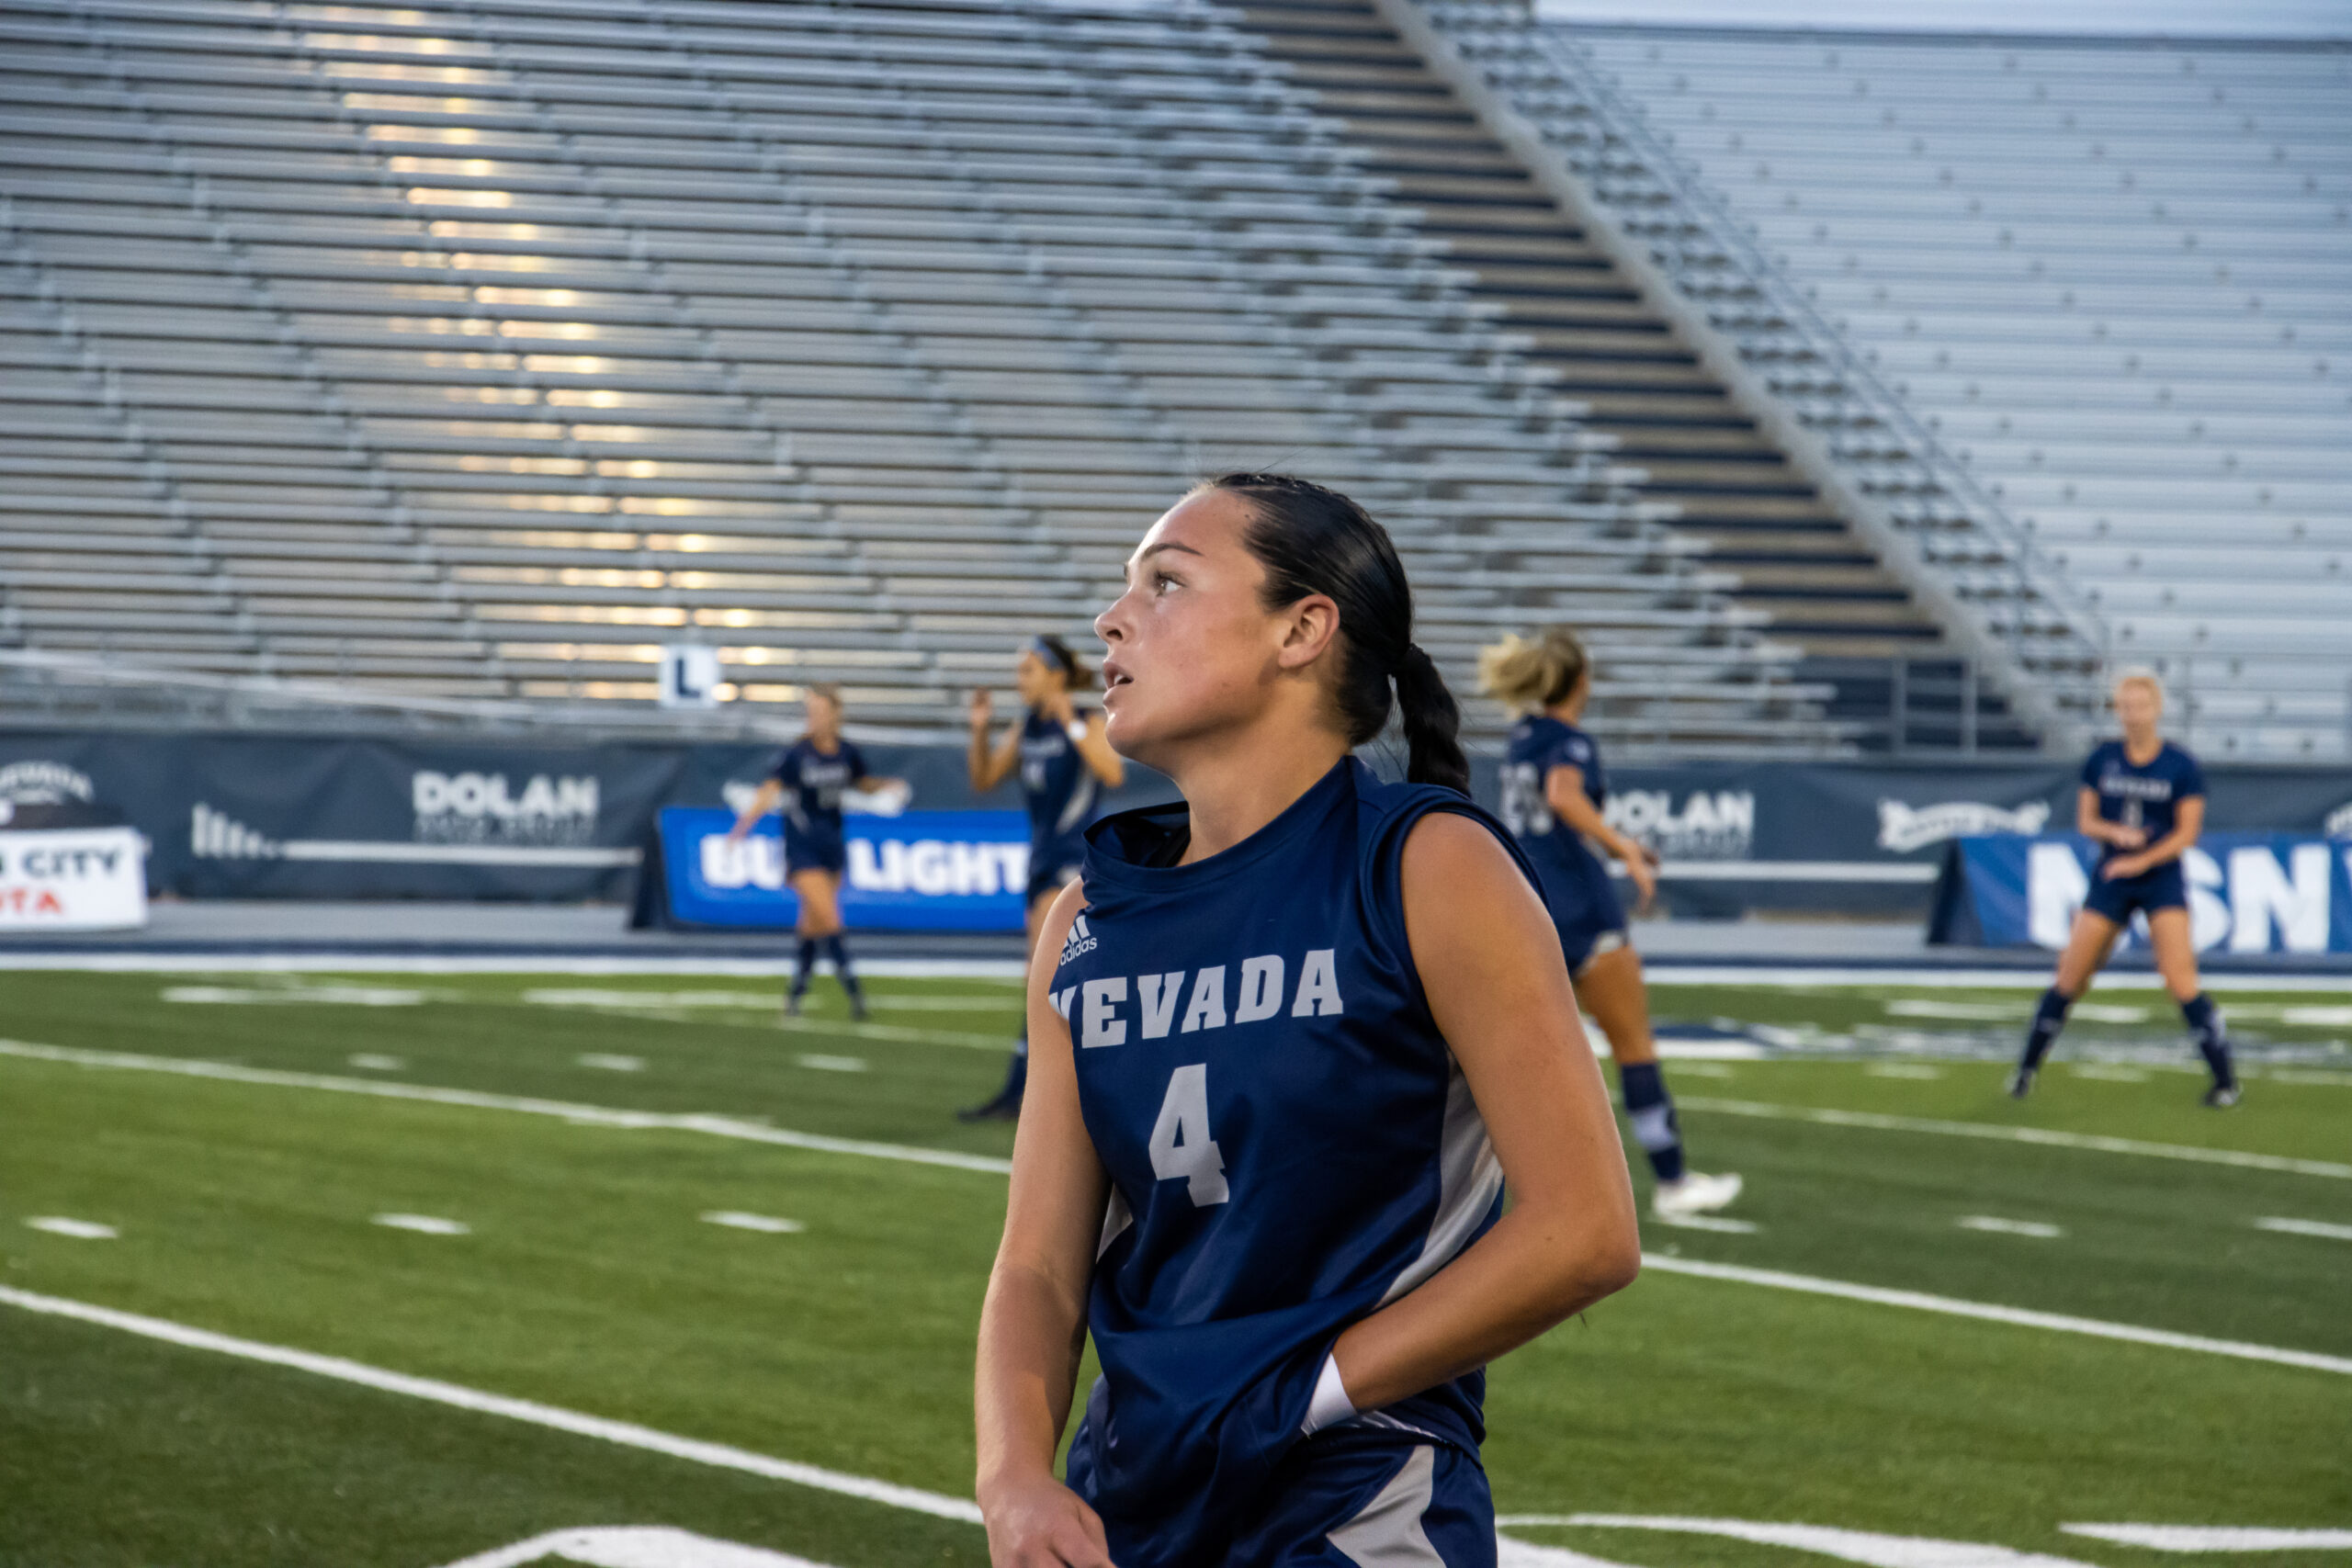 Nevada falls to Colorado 2-1 thanks to early Byrne goals